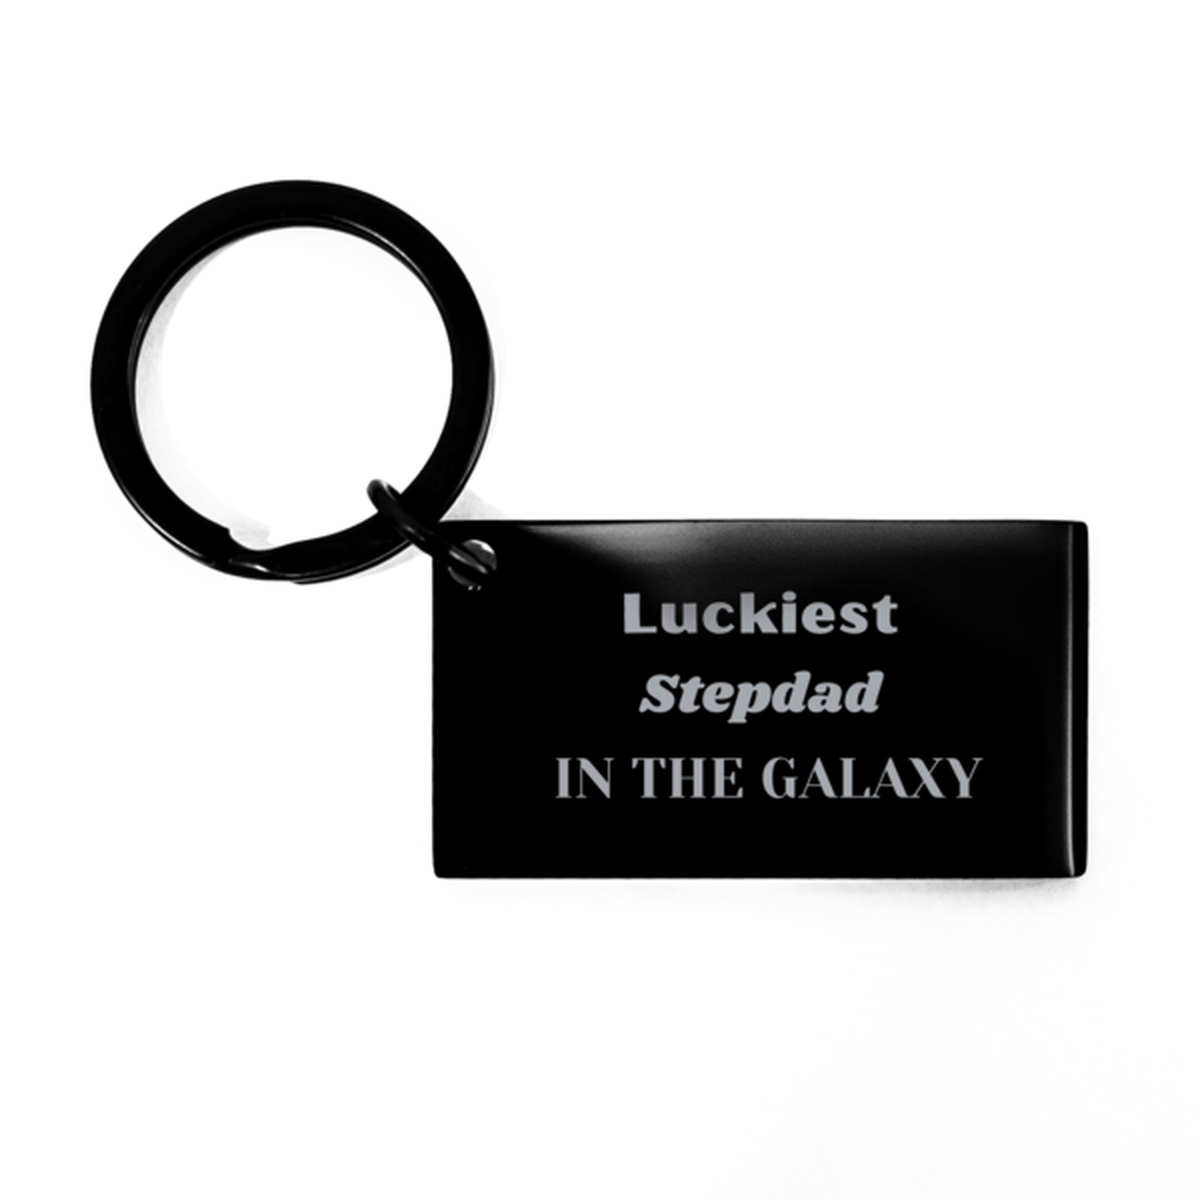 Luckiest Stepdad in the Galaxy, To My Stepdad Engraved Gifts, Christmas Stepdad Keychain Gifts, X-mas Birthday Unique Gifts For Stepdad Men Women